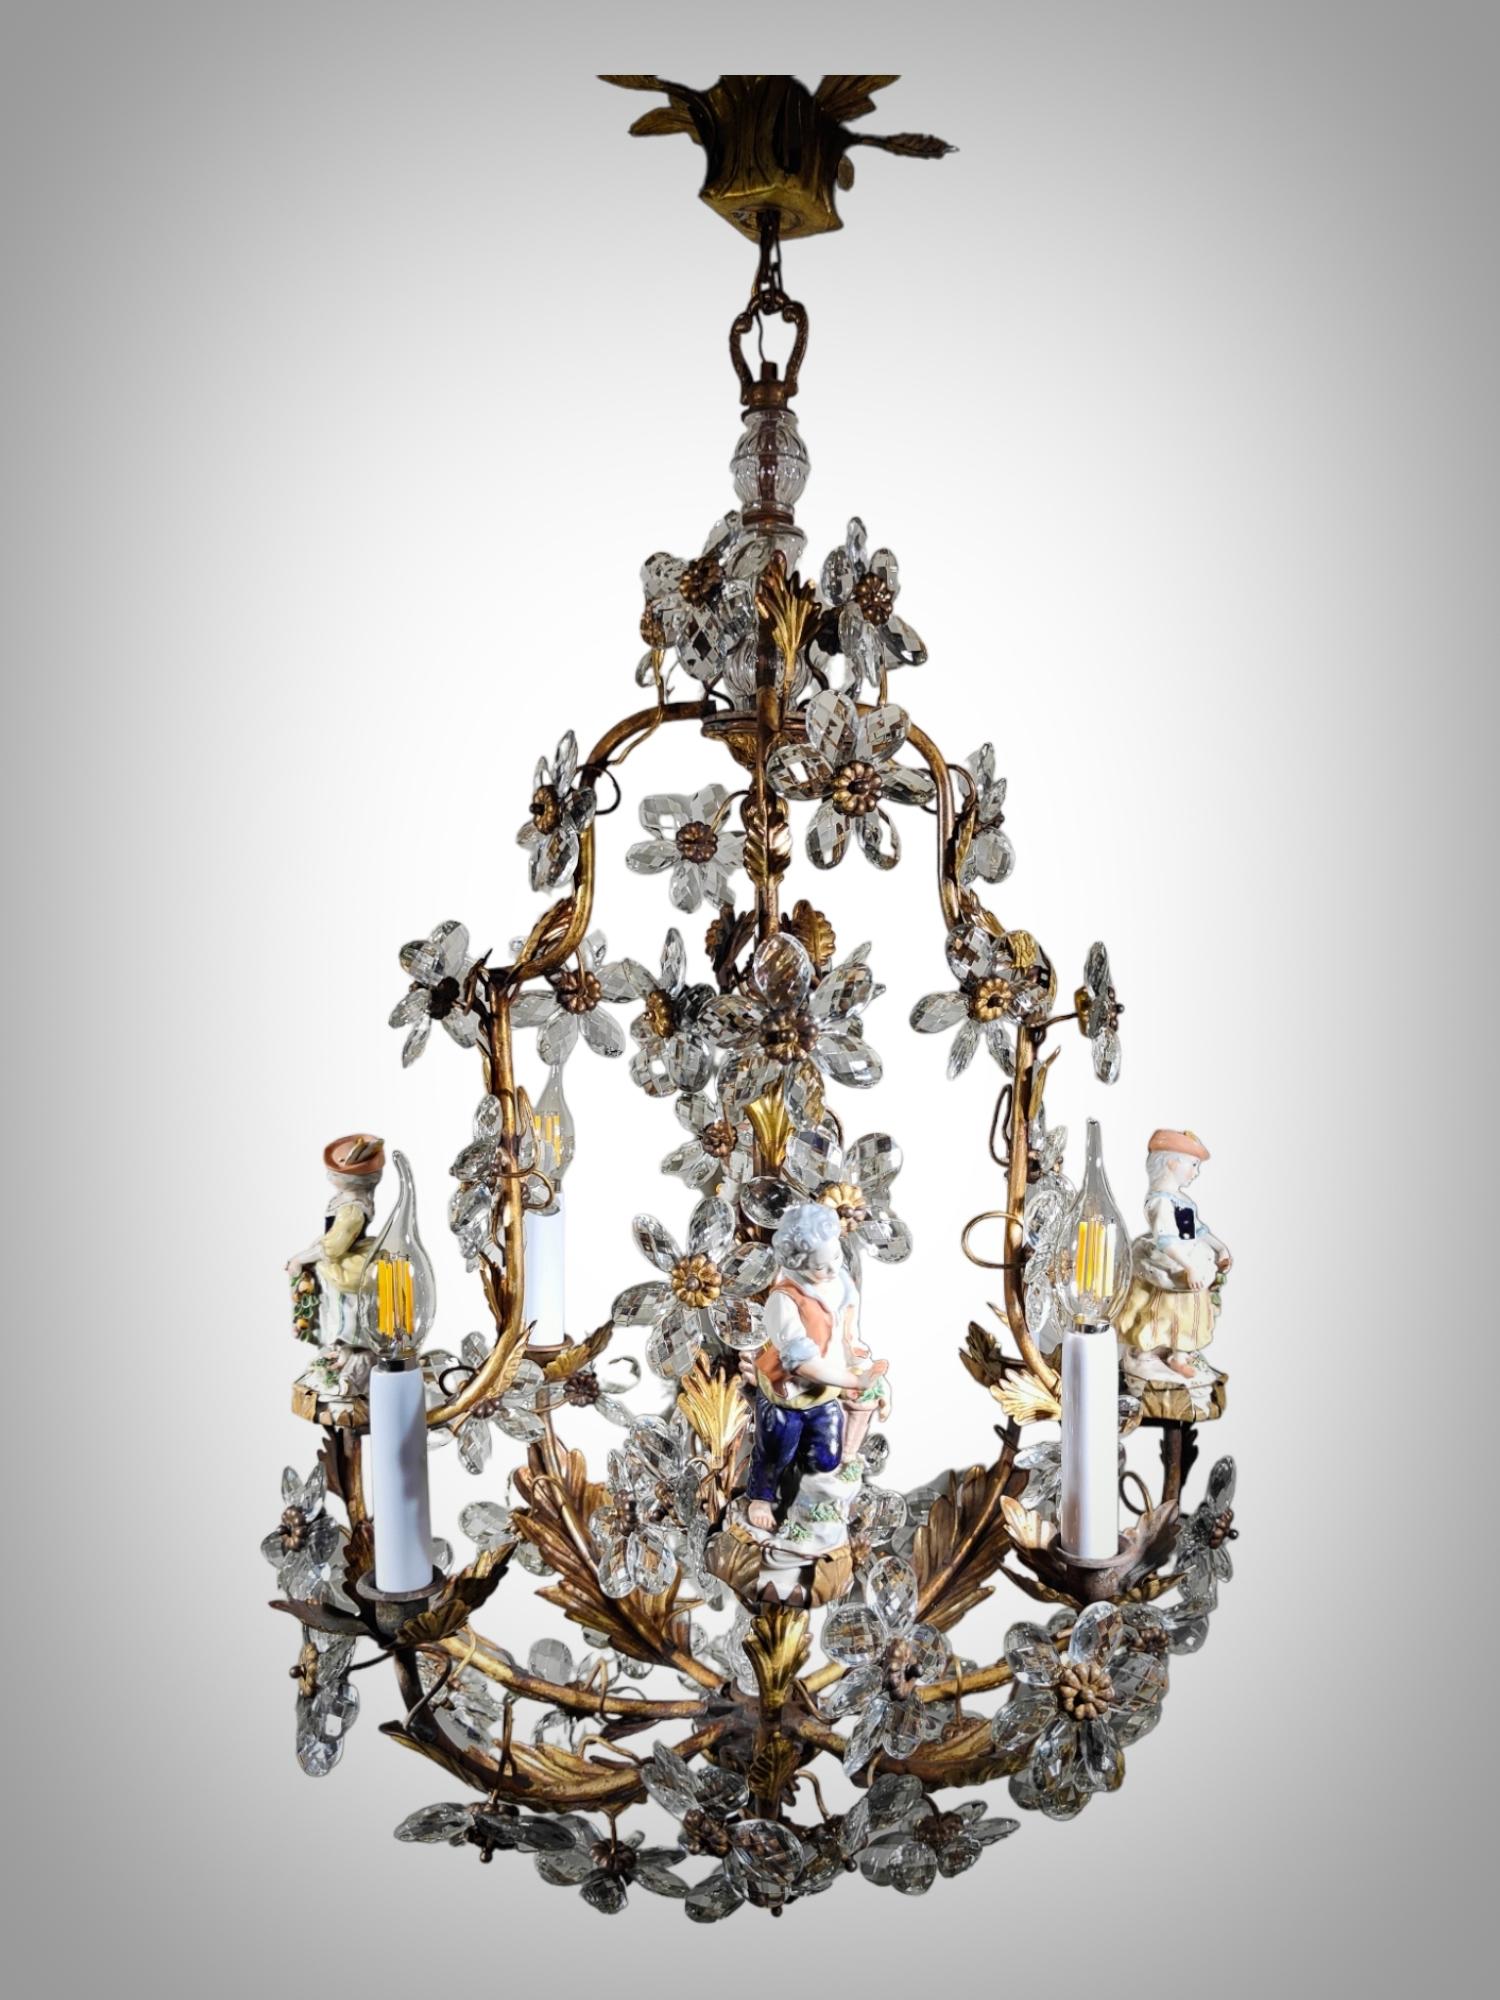 Elegant Mid-20th Century Jansen Chandelier
Very decorative chandelier from Maison Jansen in polished and faceted glass and porcelain. In very good condition and electrified. Measures: 90 cm high and 60 cm in diameter